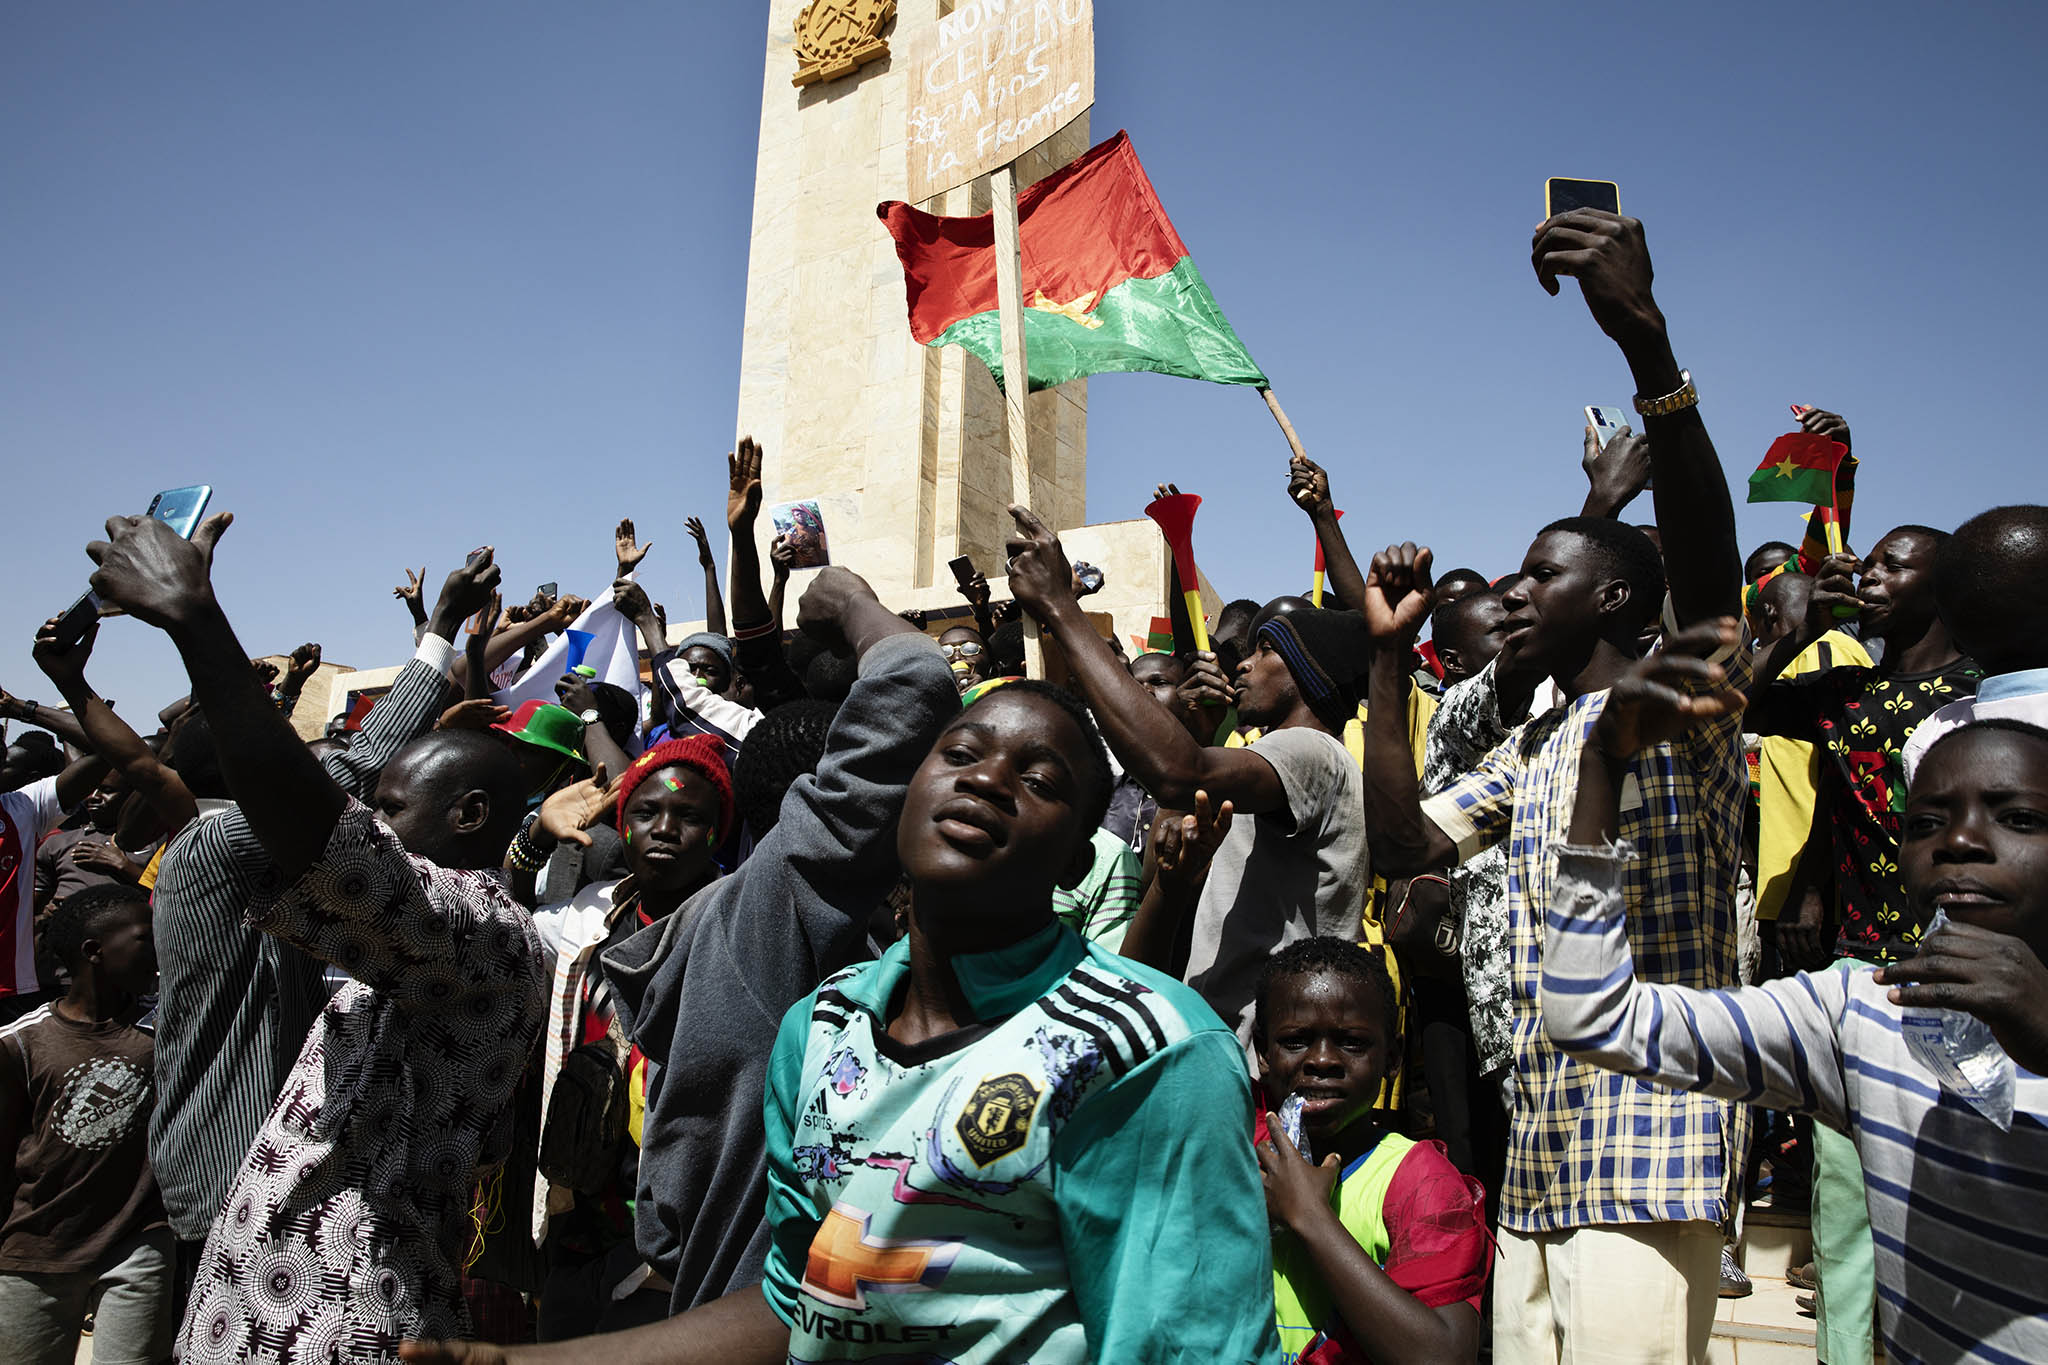 Young Burkinabe gather in the capital, Ouagadougou, following Burkina Faso’s January 2022 coup d’état. Burkina Faso’s junta, like those of Mali and Niger, has resisted pressures for an early return to civilian rule. (Malin Fezehai/The New York Times)